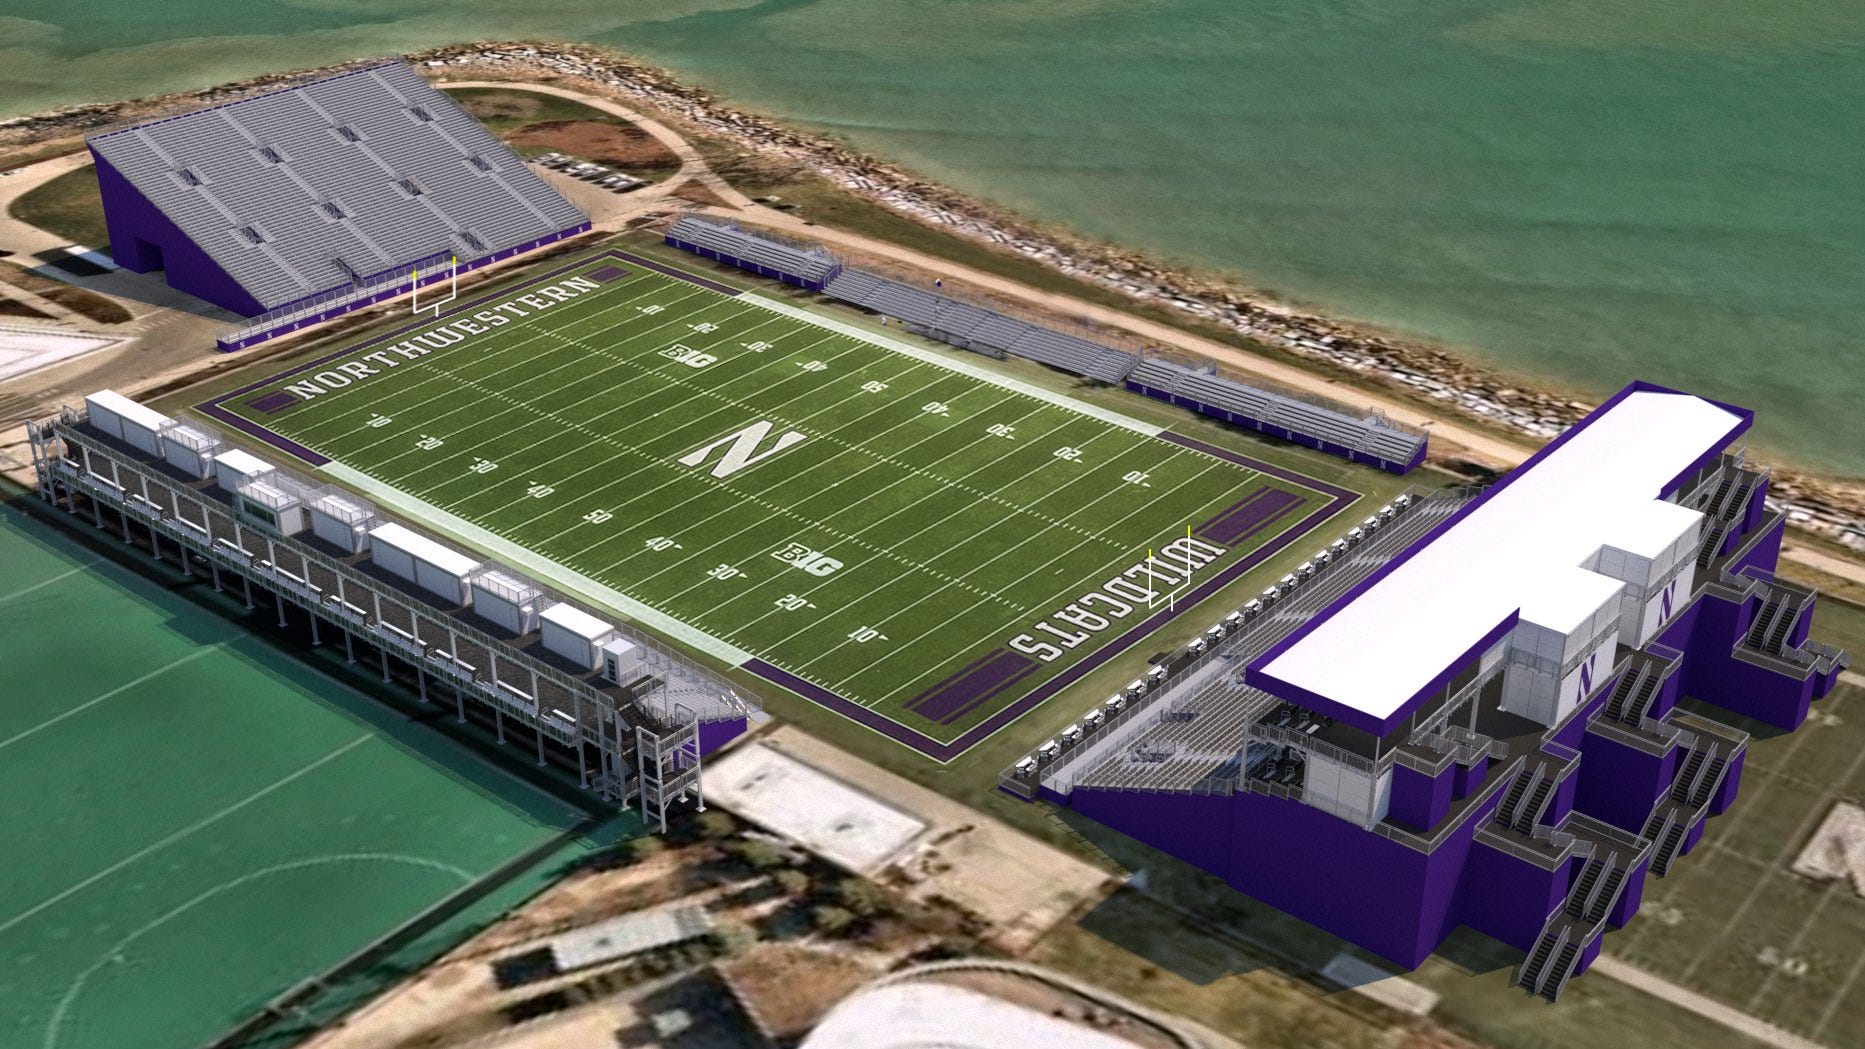 Northwestern's 'imperfect' pop-up stadium will make for scenic Indiana football game